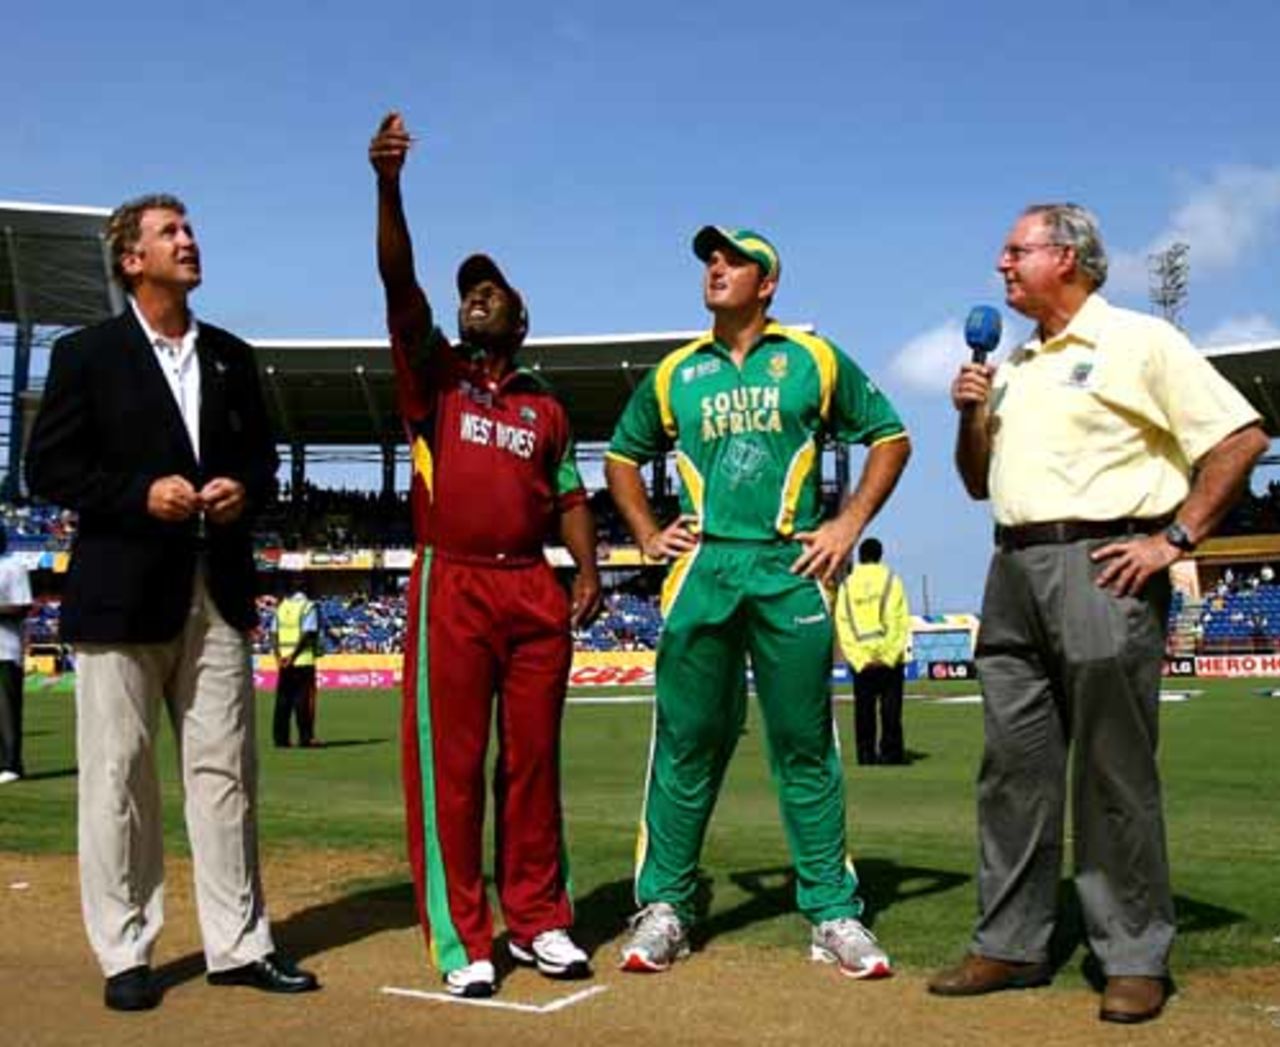 Match referee Chris Broad (extreme left) and television commentator Tony Cozier with captains Brian Lara and Graeme Smith at the toss, South Africa v West Indies, Super Eights, Grenada, April 9, 2007